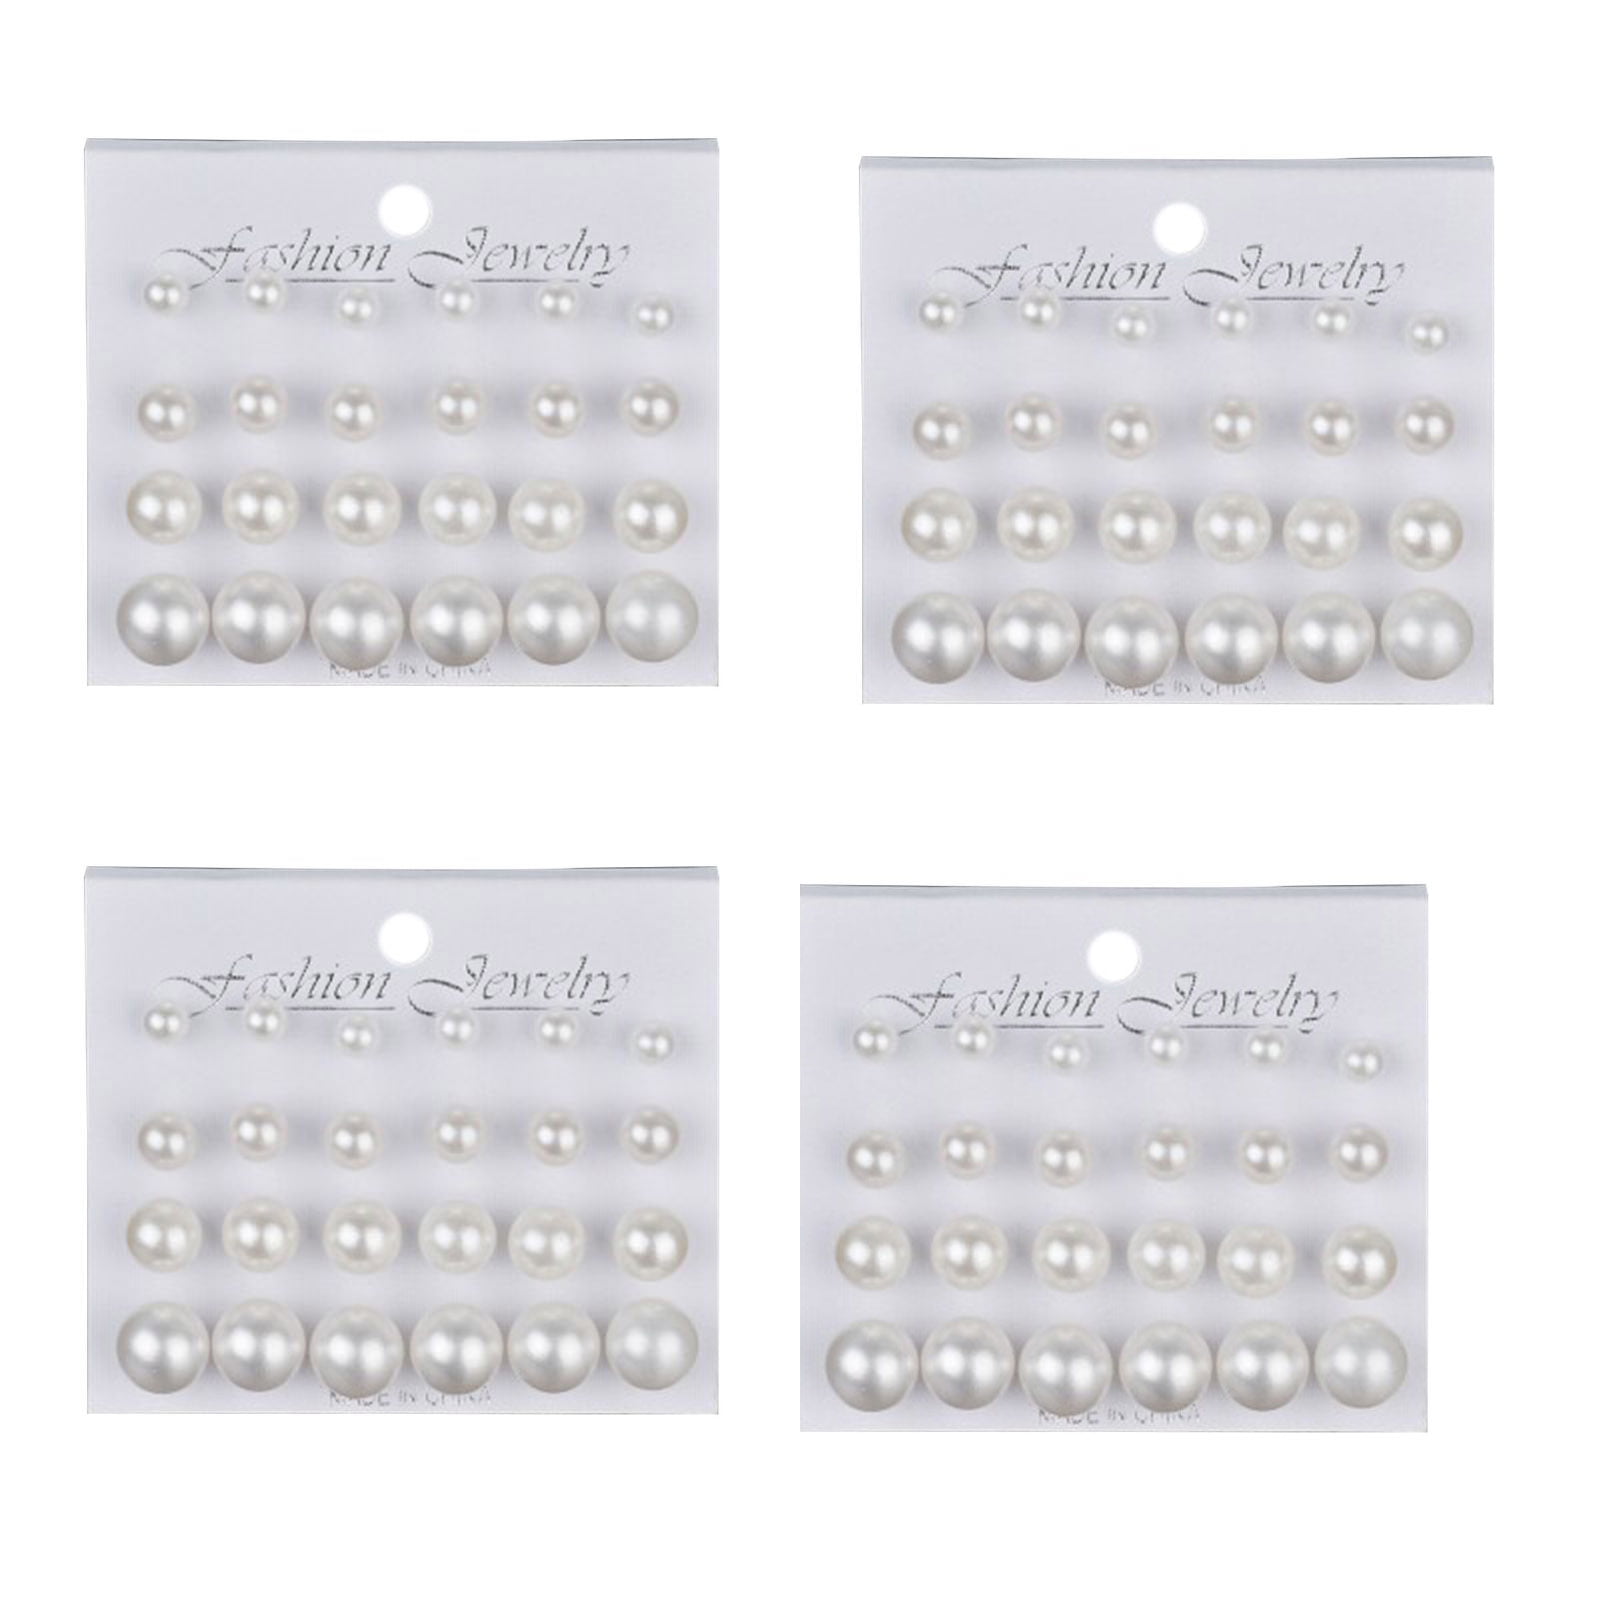 SHIYAO 4 Set New Fashion 6mm/8mm/10mm/12mm 12 pairs/set Simulated Pearl Earrings For Women Jewelry Pendientes Fashion Stud Earrings(White)